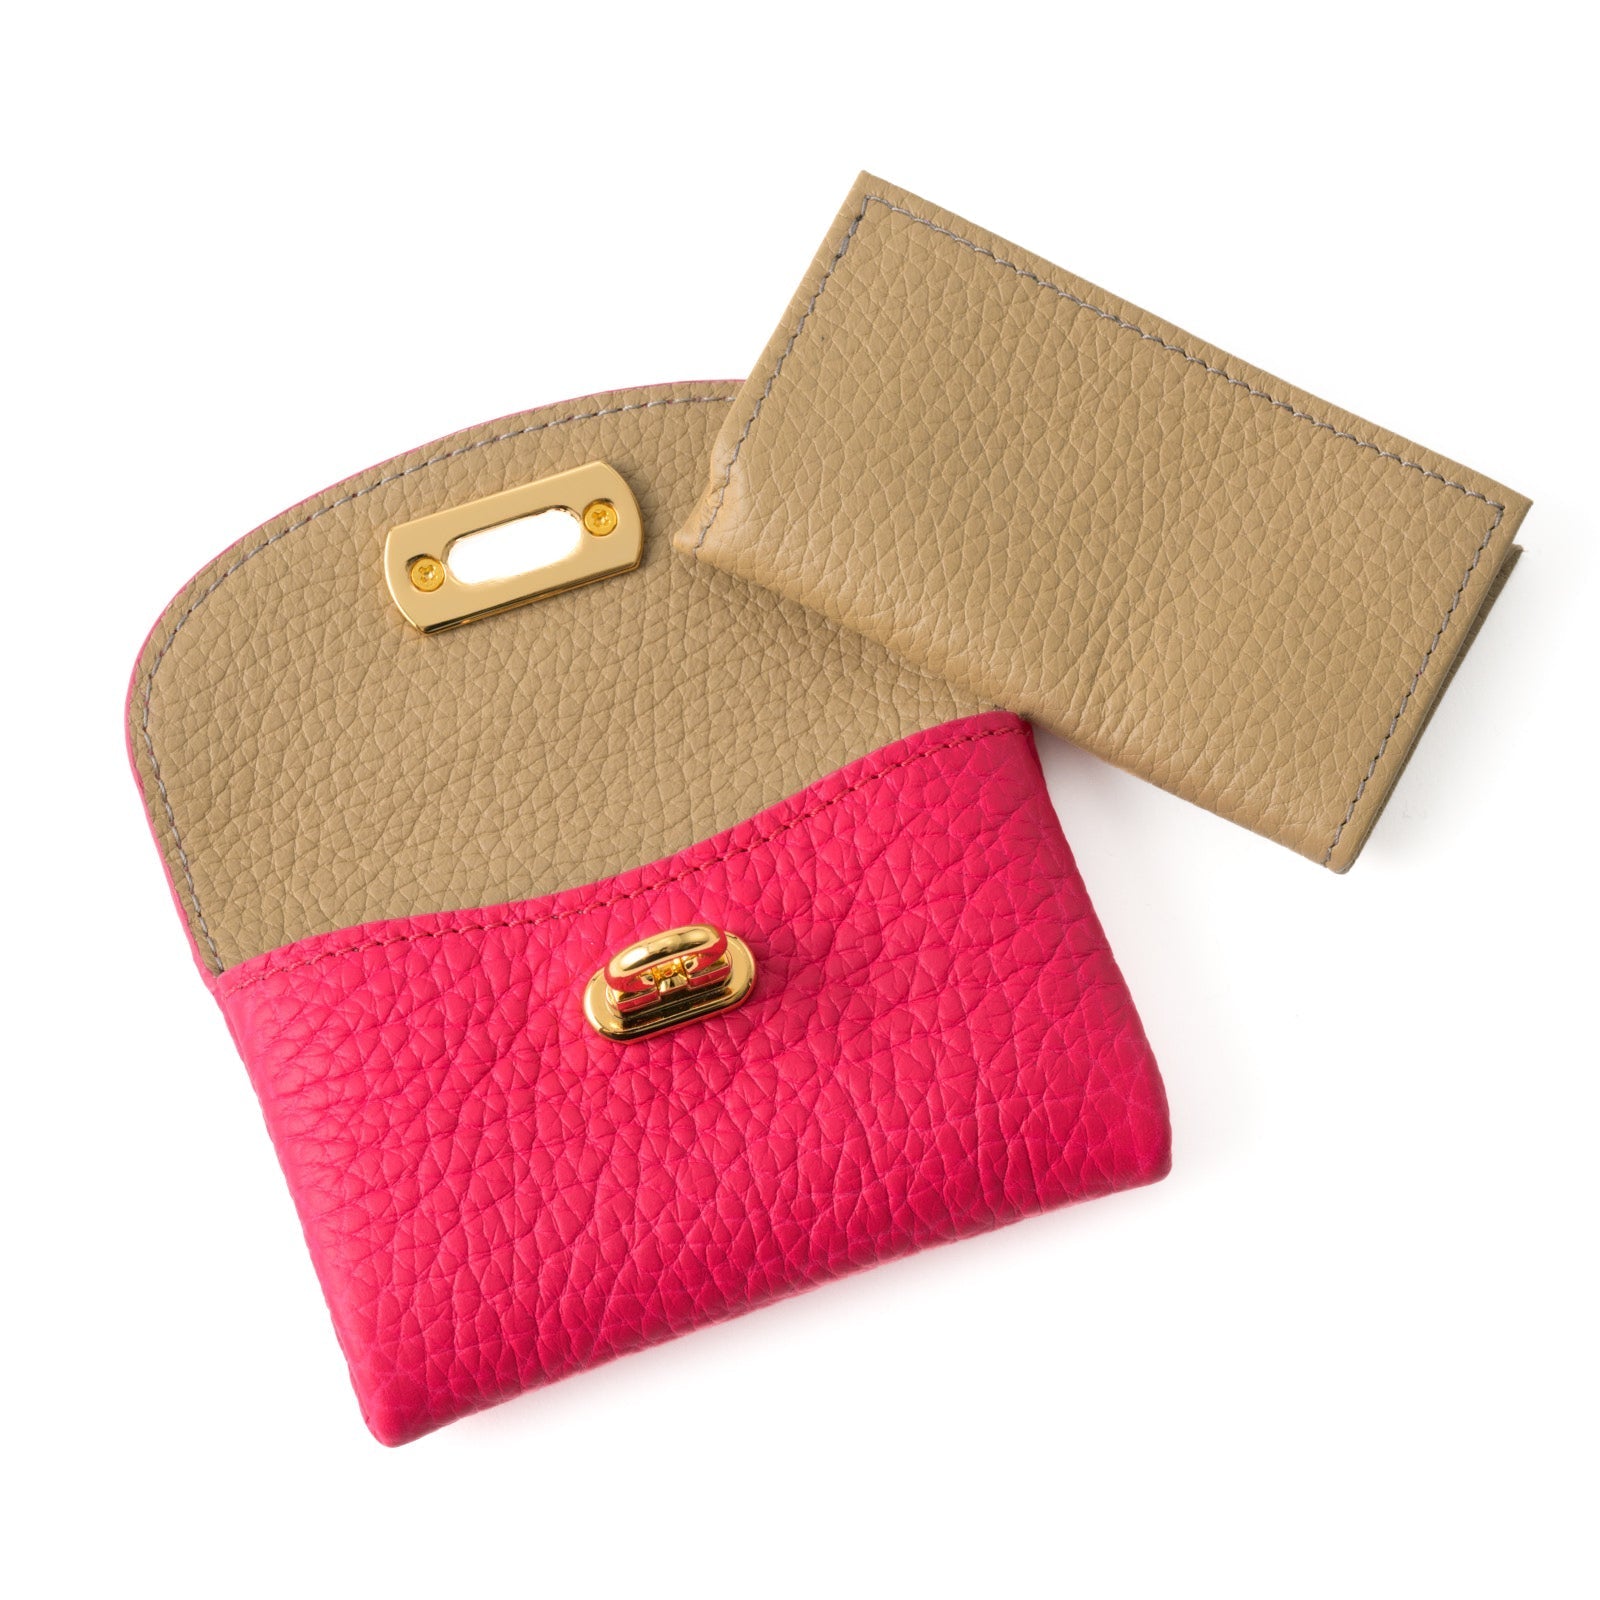 Leather flap mini wallet / Taurillon Clemence